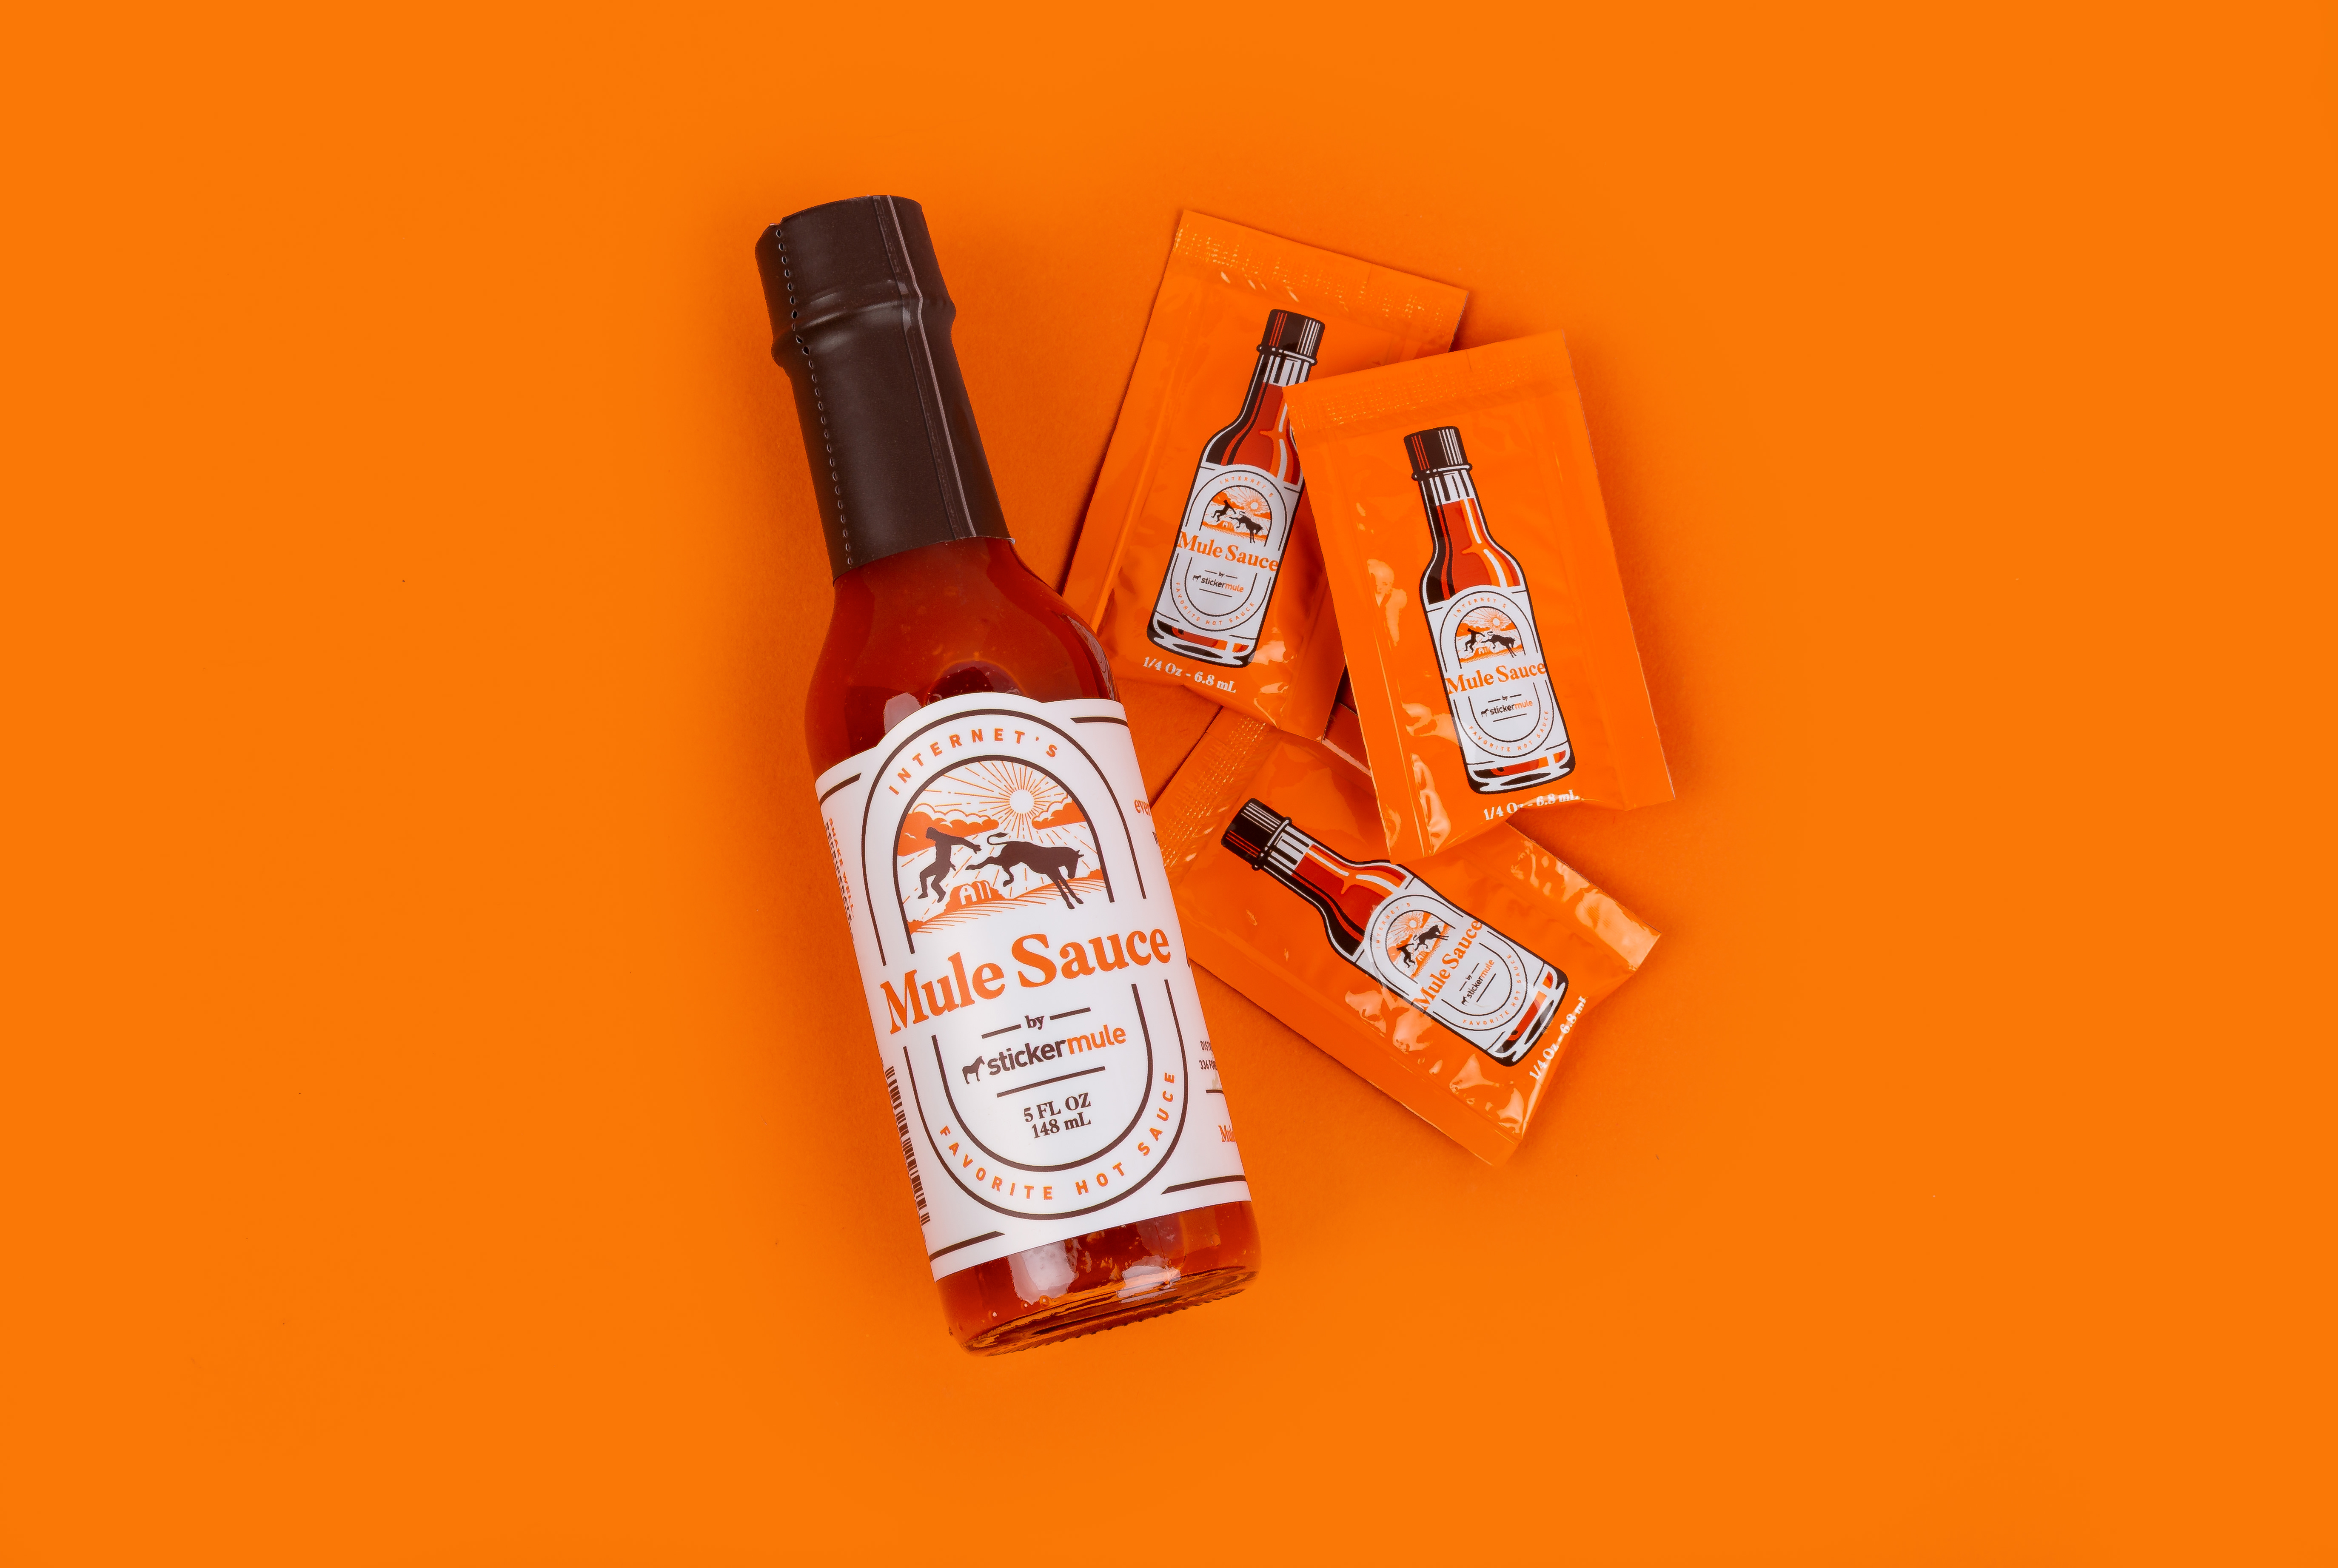 mule sauce hot sauce bottle next to mule sauce packets on an orange background